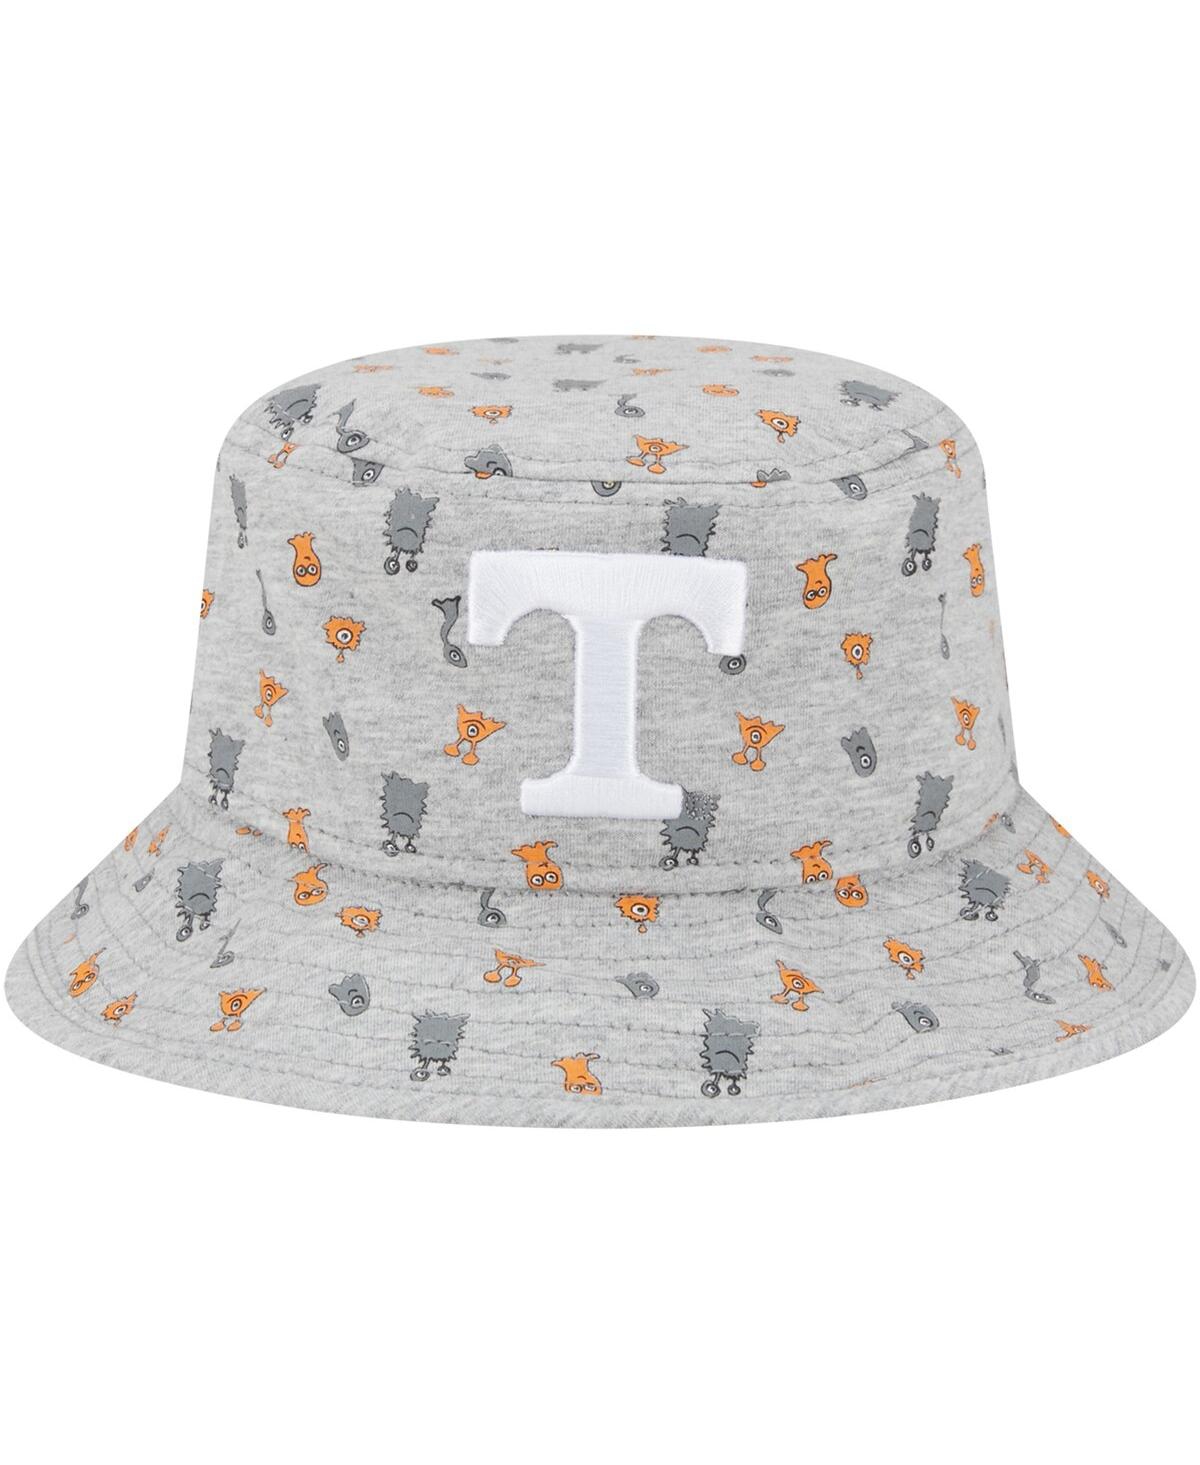 Shop New Era Toddler Boys And Girls  Heather Gray Tennessee Volunteers Critter Bucket Hat